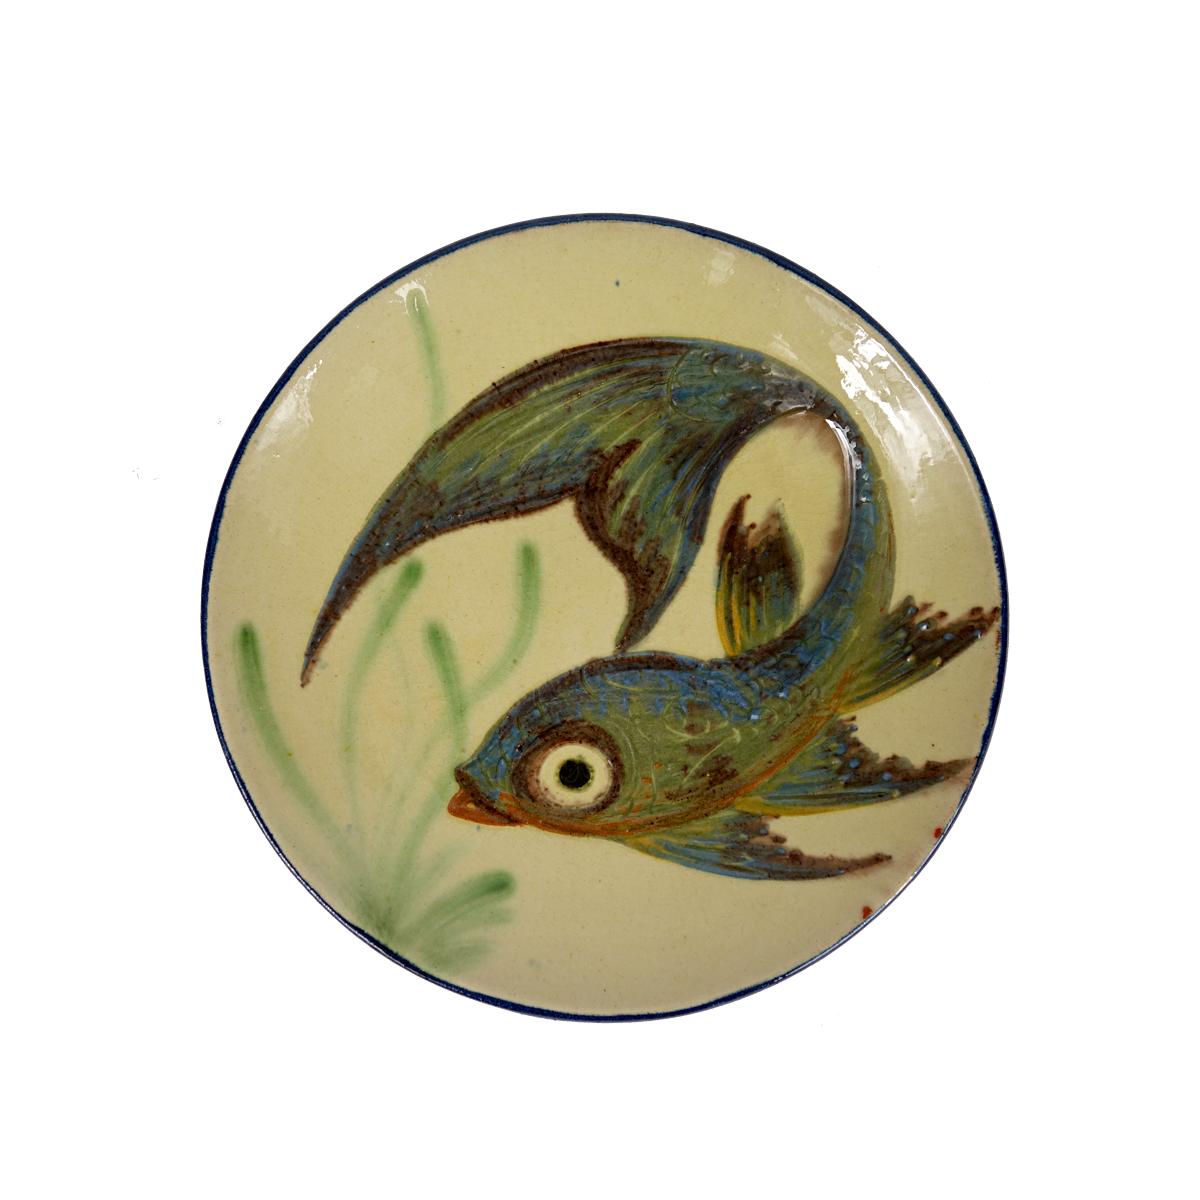 Set of 3 Ceramic Wall Plates with Fish Decor Signed by Spanish Maker Puigdemont For Sale 3